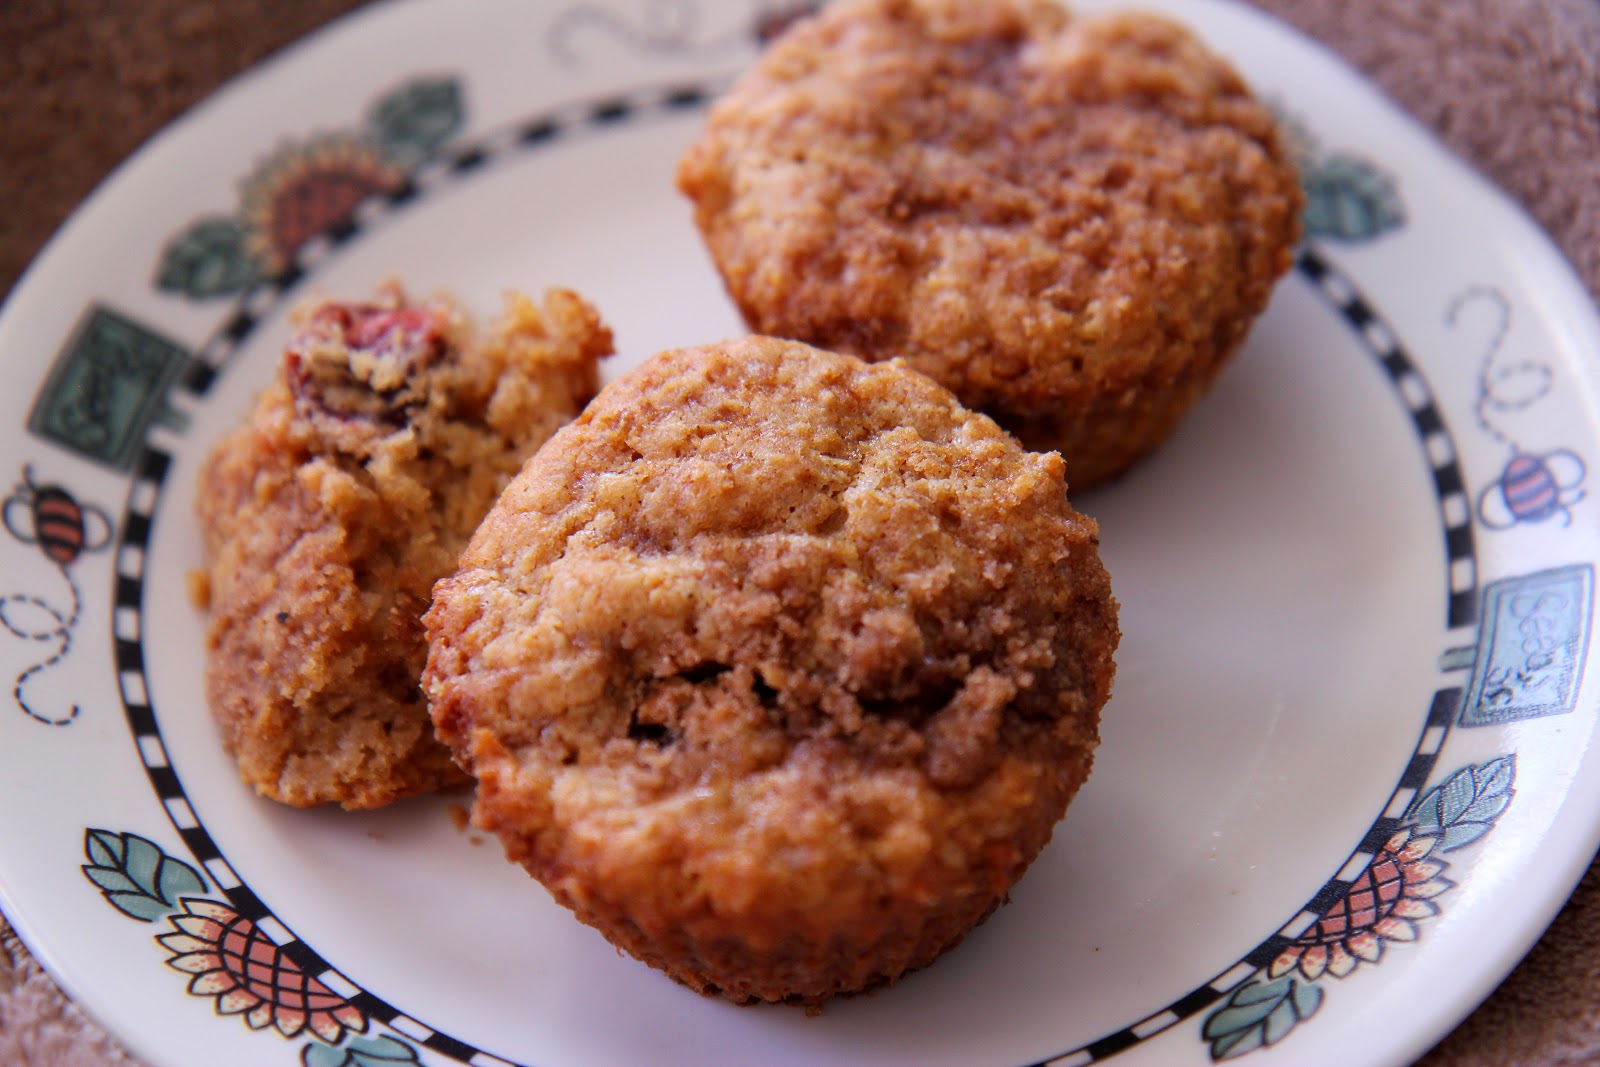 Looking for a gluten-free muffin recipe that doesn't taste GF? These cherry sour cream muffins fit the order!